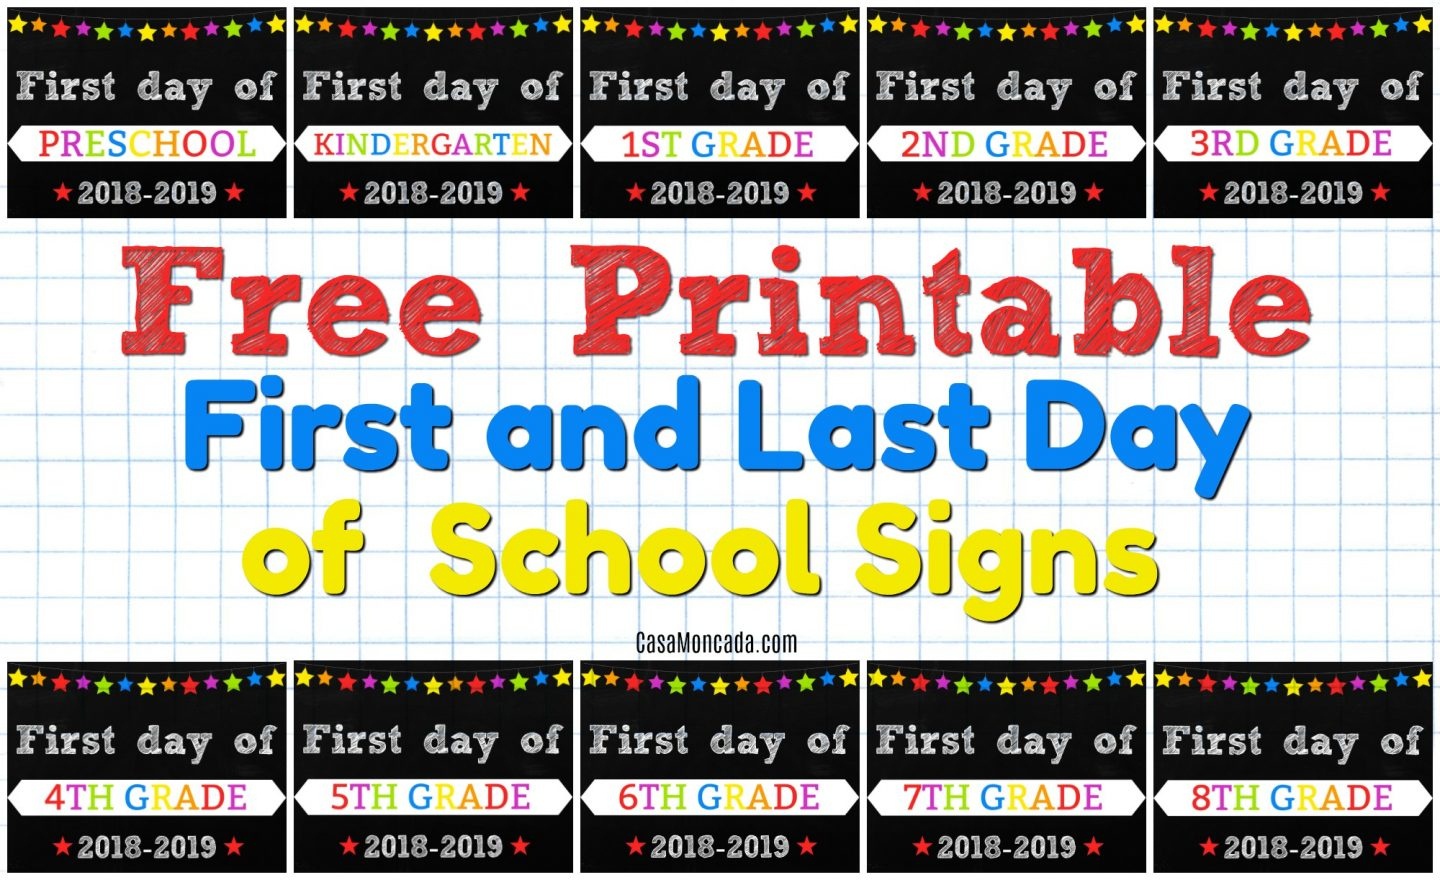 Free Printable First And Last Day Of School Signs - Casa Moncada - Free Printable First Day Of School Signs